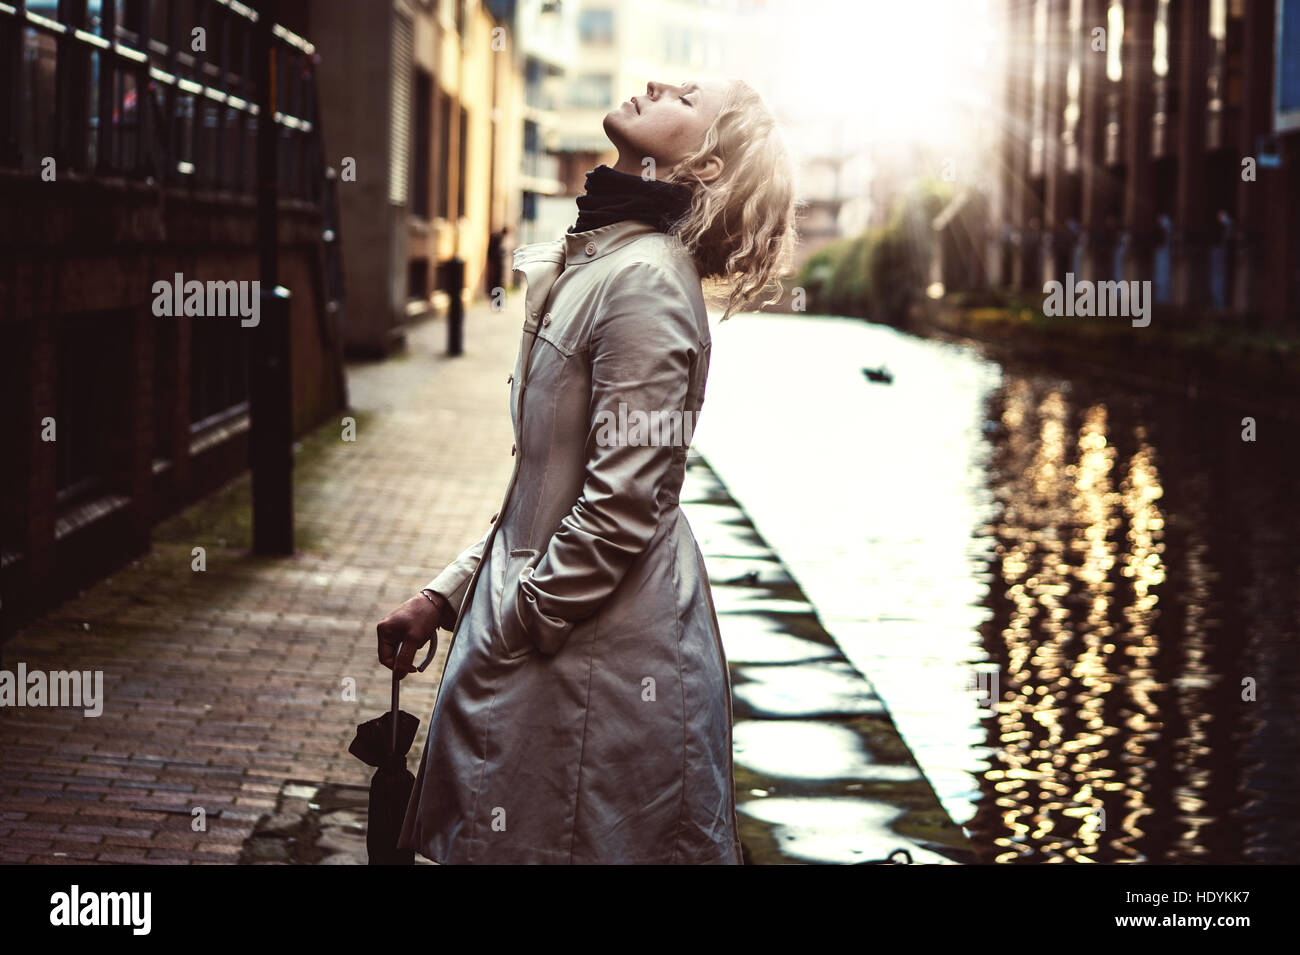 dreamy image with woman with umbrella by the water Stock Photo